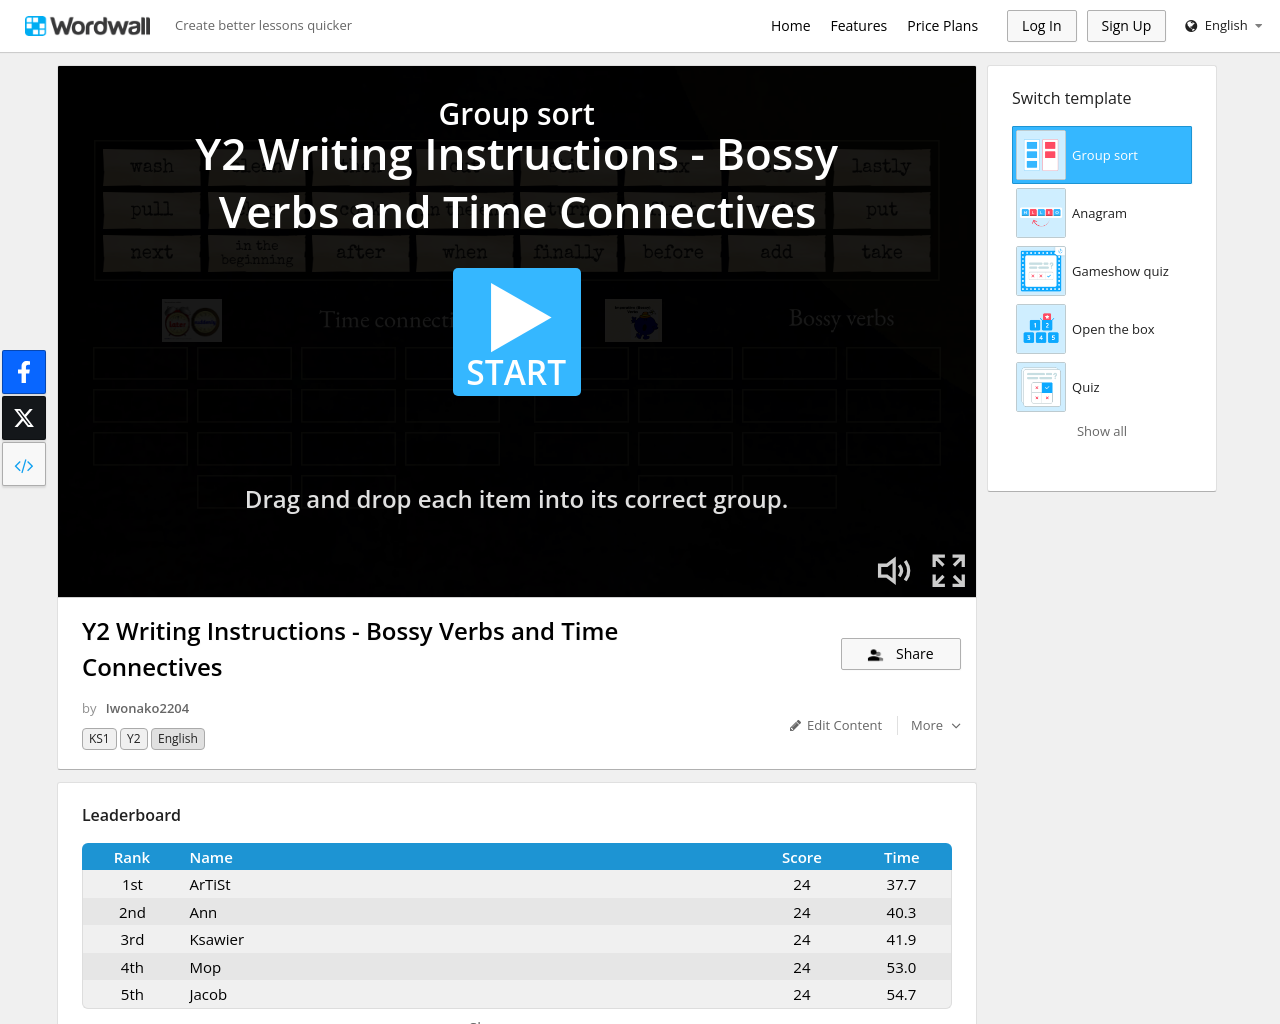 Bossy Verbs and Time Connectives